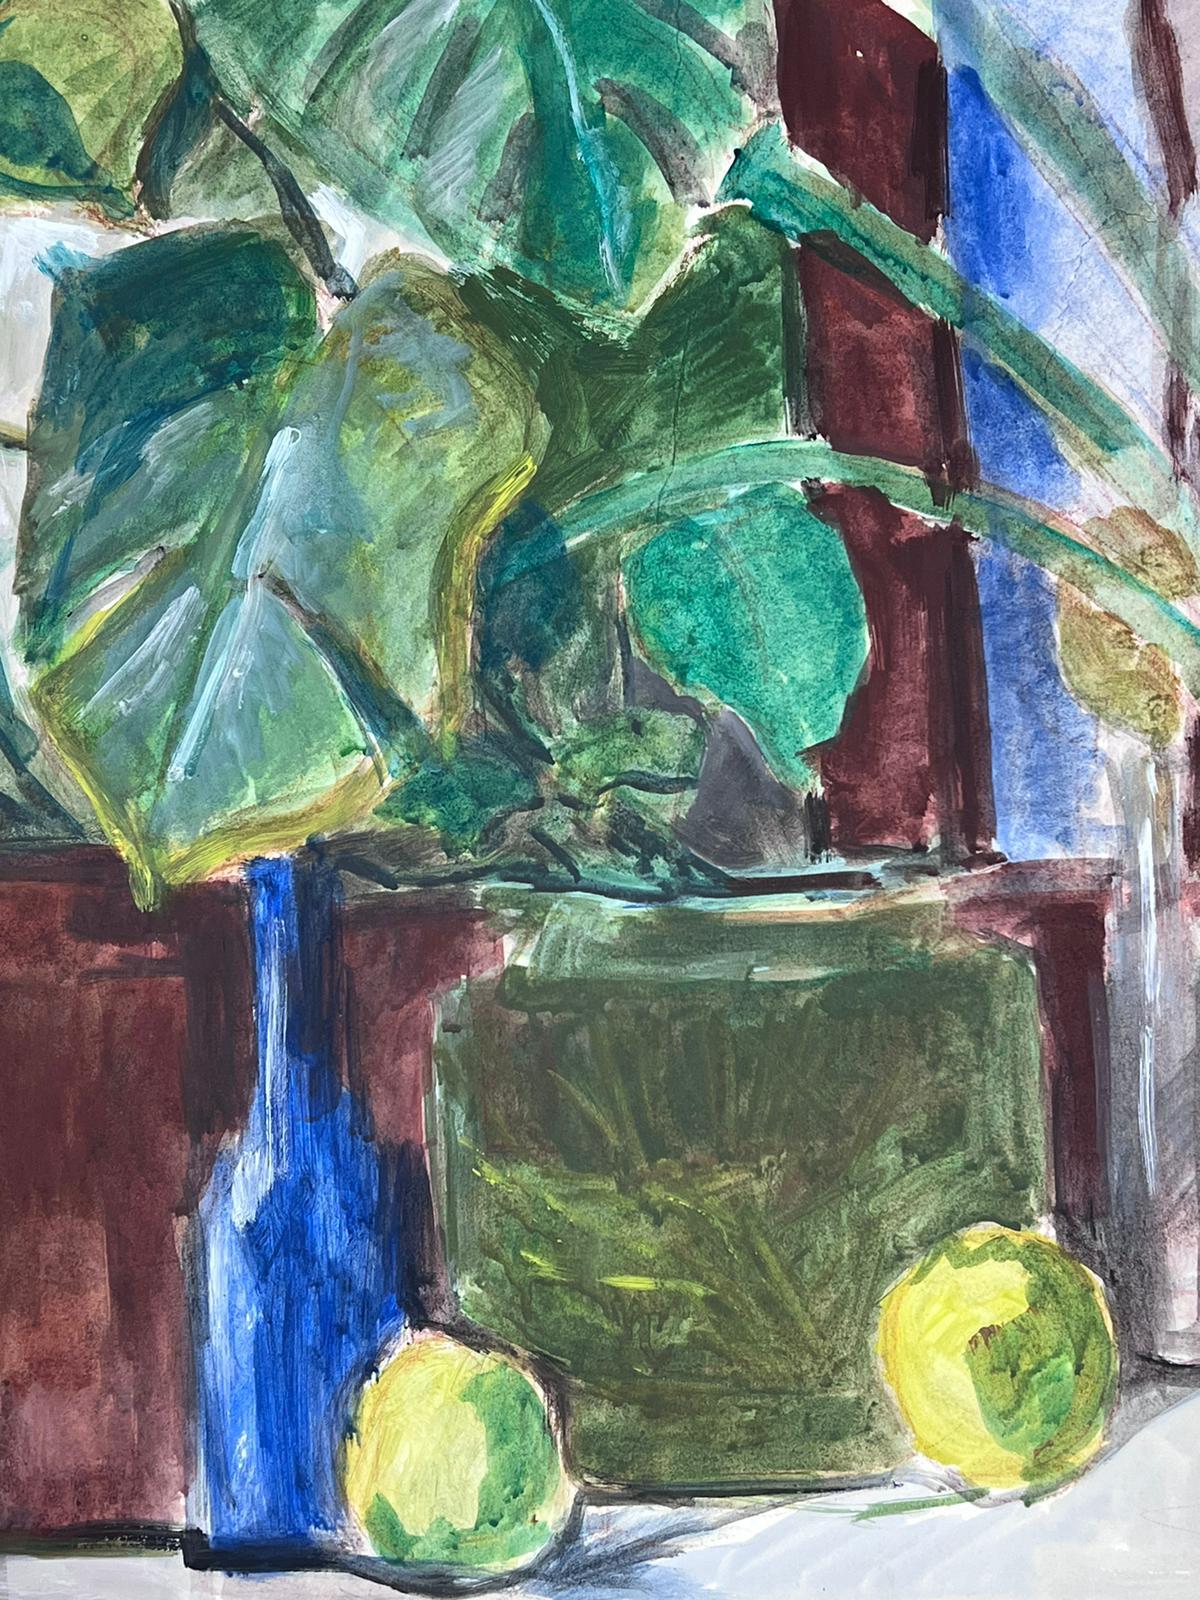 Plant and Bottles Still Life
by Guy Nicod
(French 1923 - 2021)
watercolour on artist paper, unframed
painting : 20 x 25.5 inches
stamped verso
provenance: artists estate, France
condition: very good and sound condition